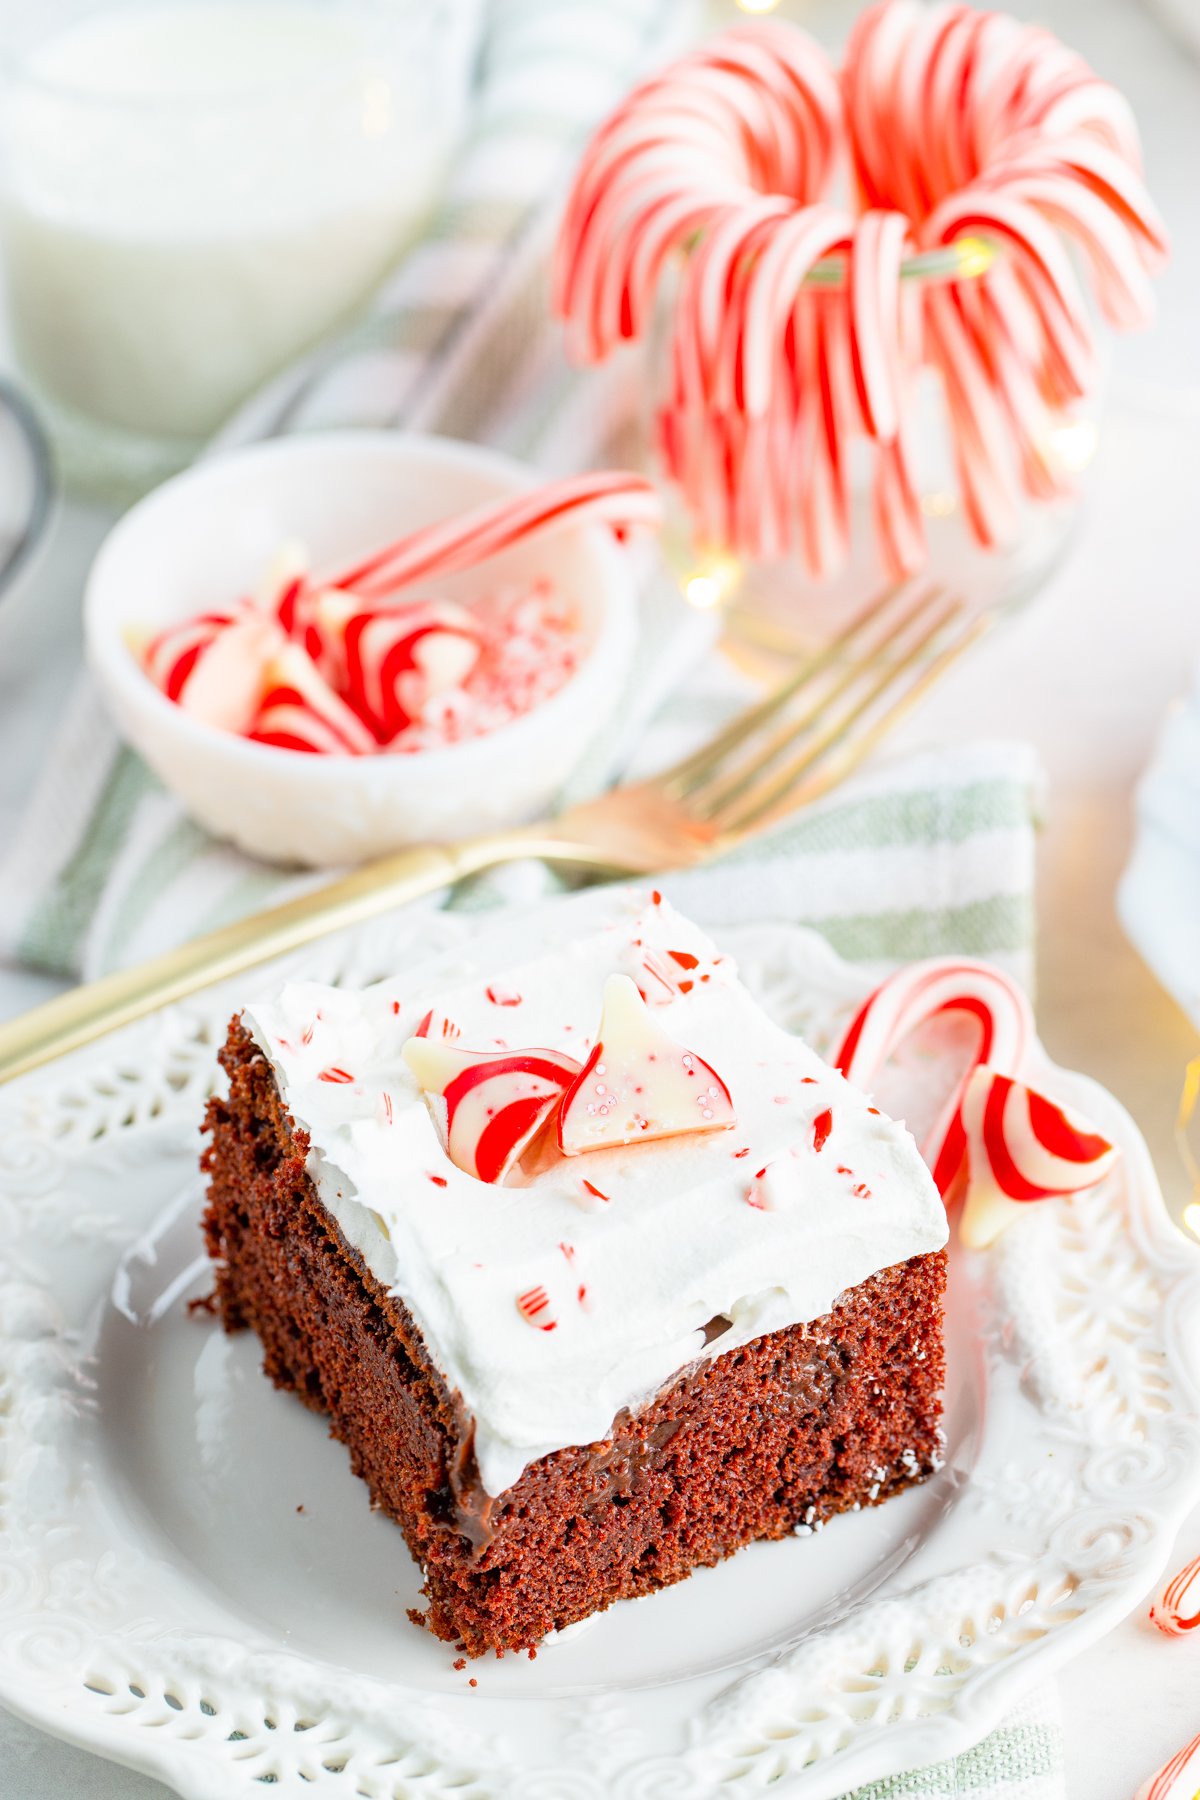 One slice of cake on white plate with candy canes in background